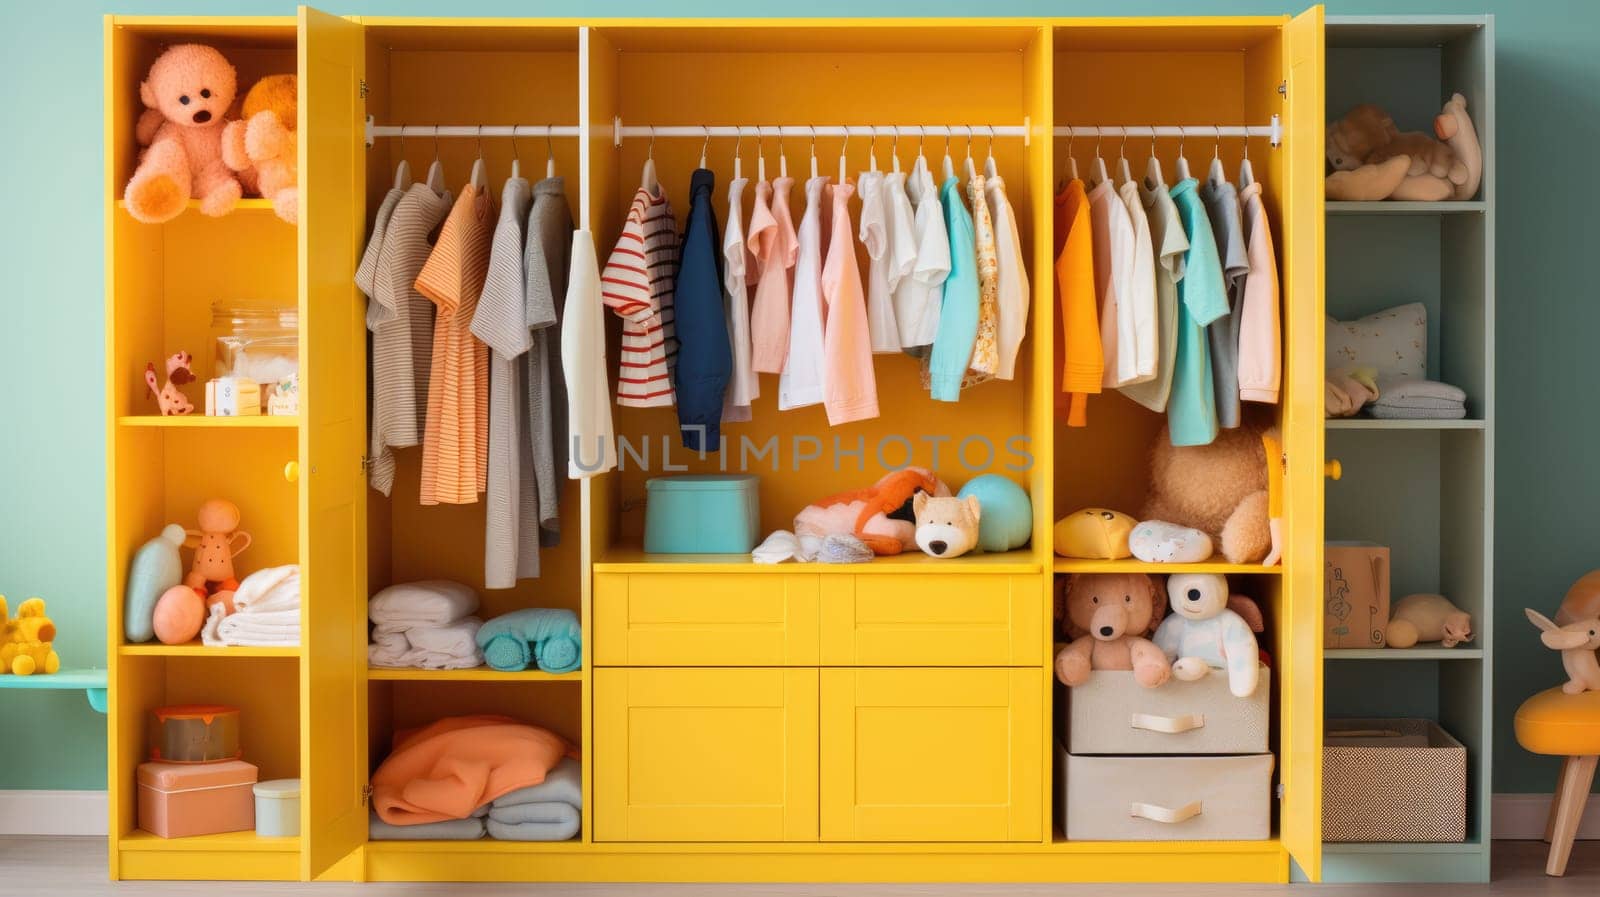 Children's wardrobe with various bright clothes for babies. by natali_brill